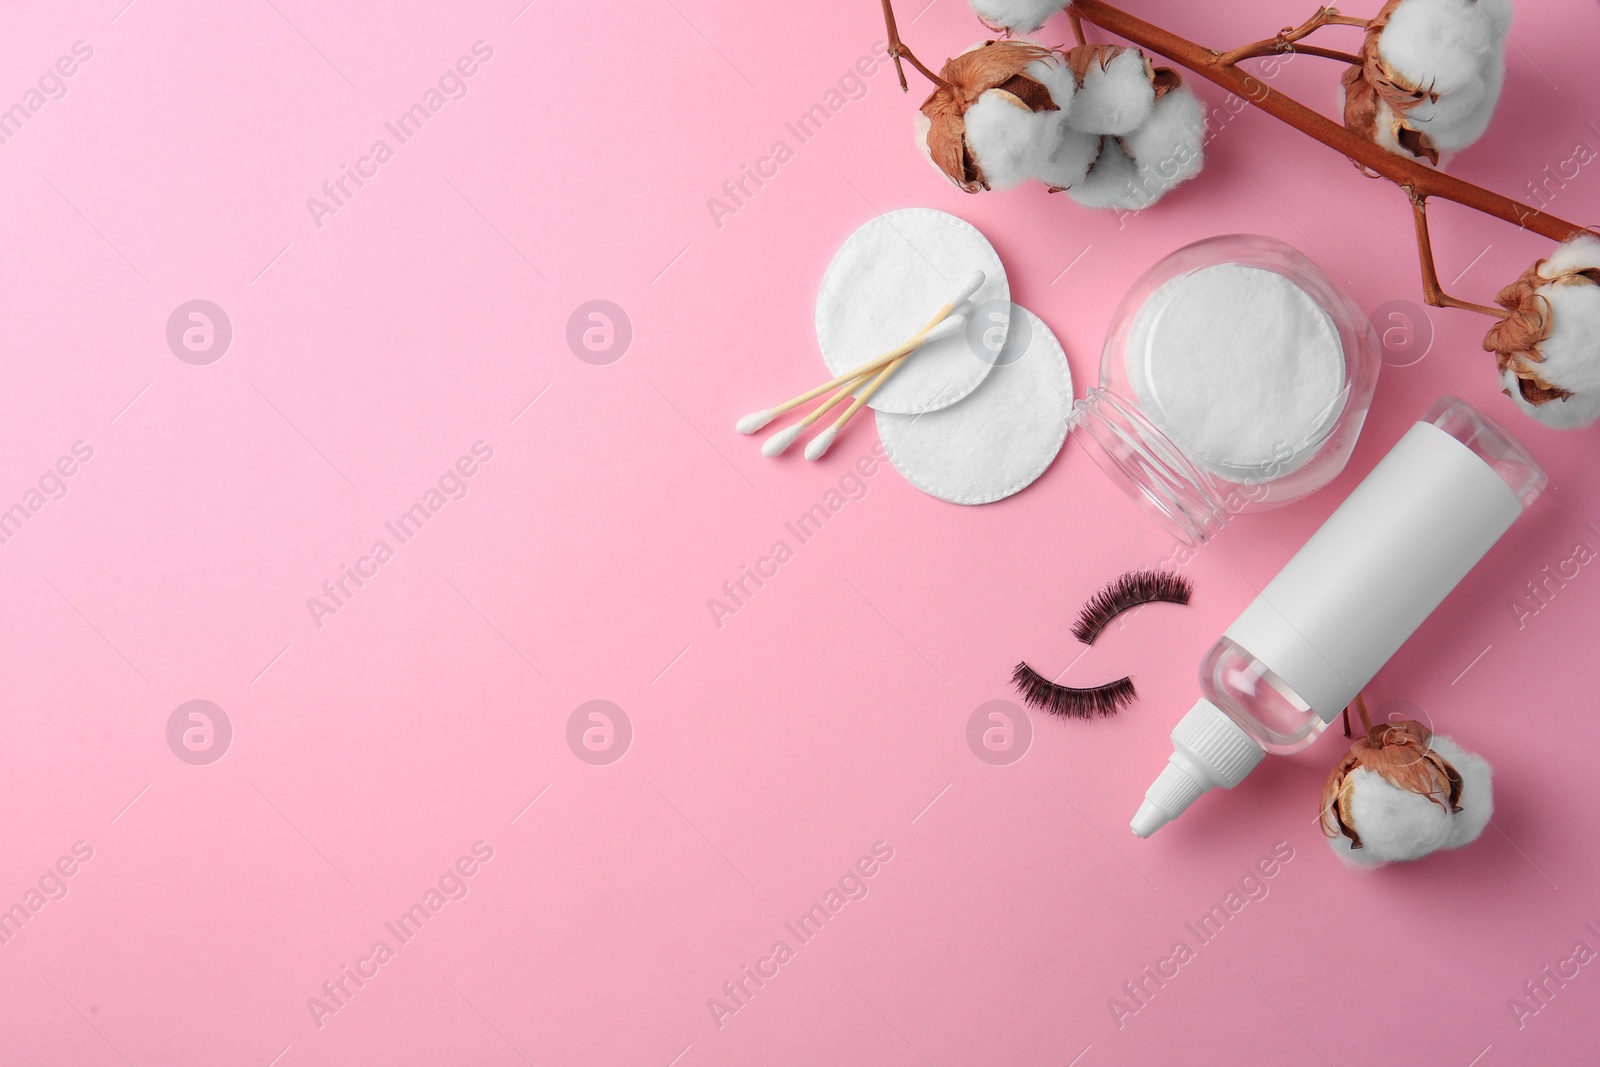 Photo of Bottle of makeup remover, cotton flowers, pads, swabs and false eyelashes on pink background, flat lay. Space for text